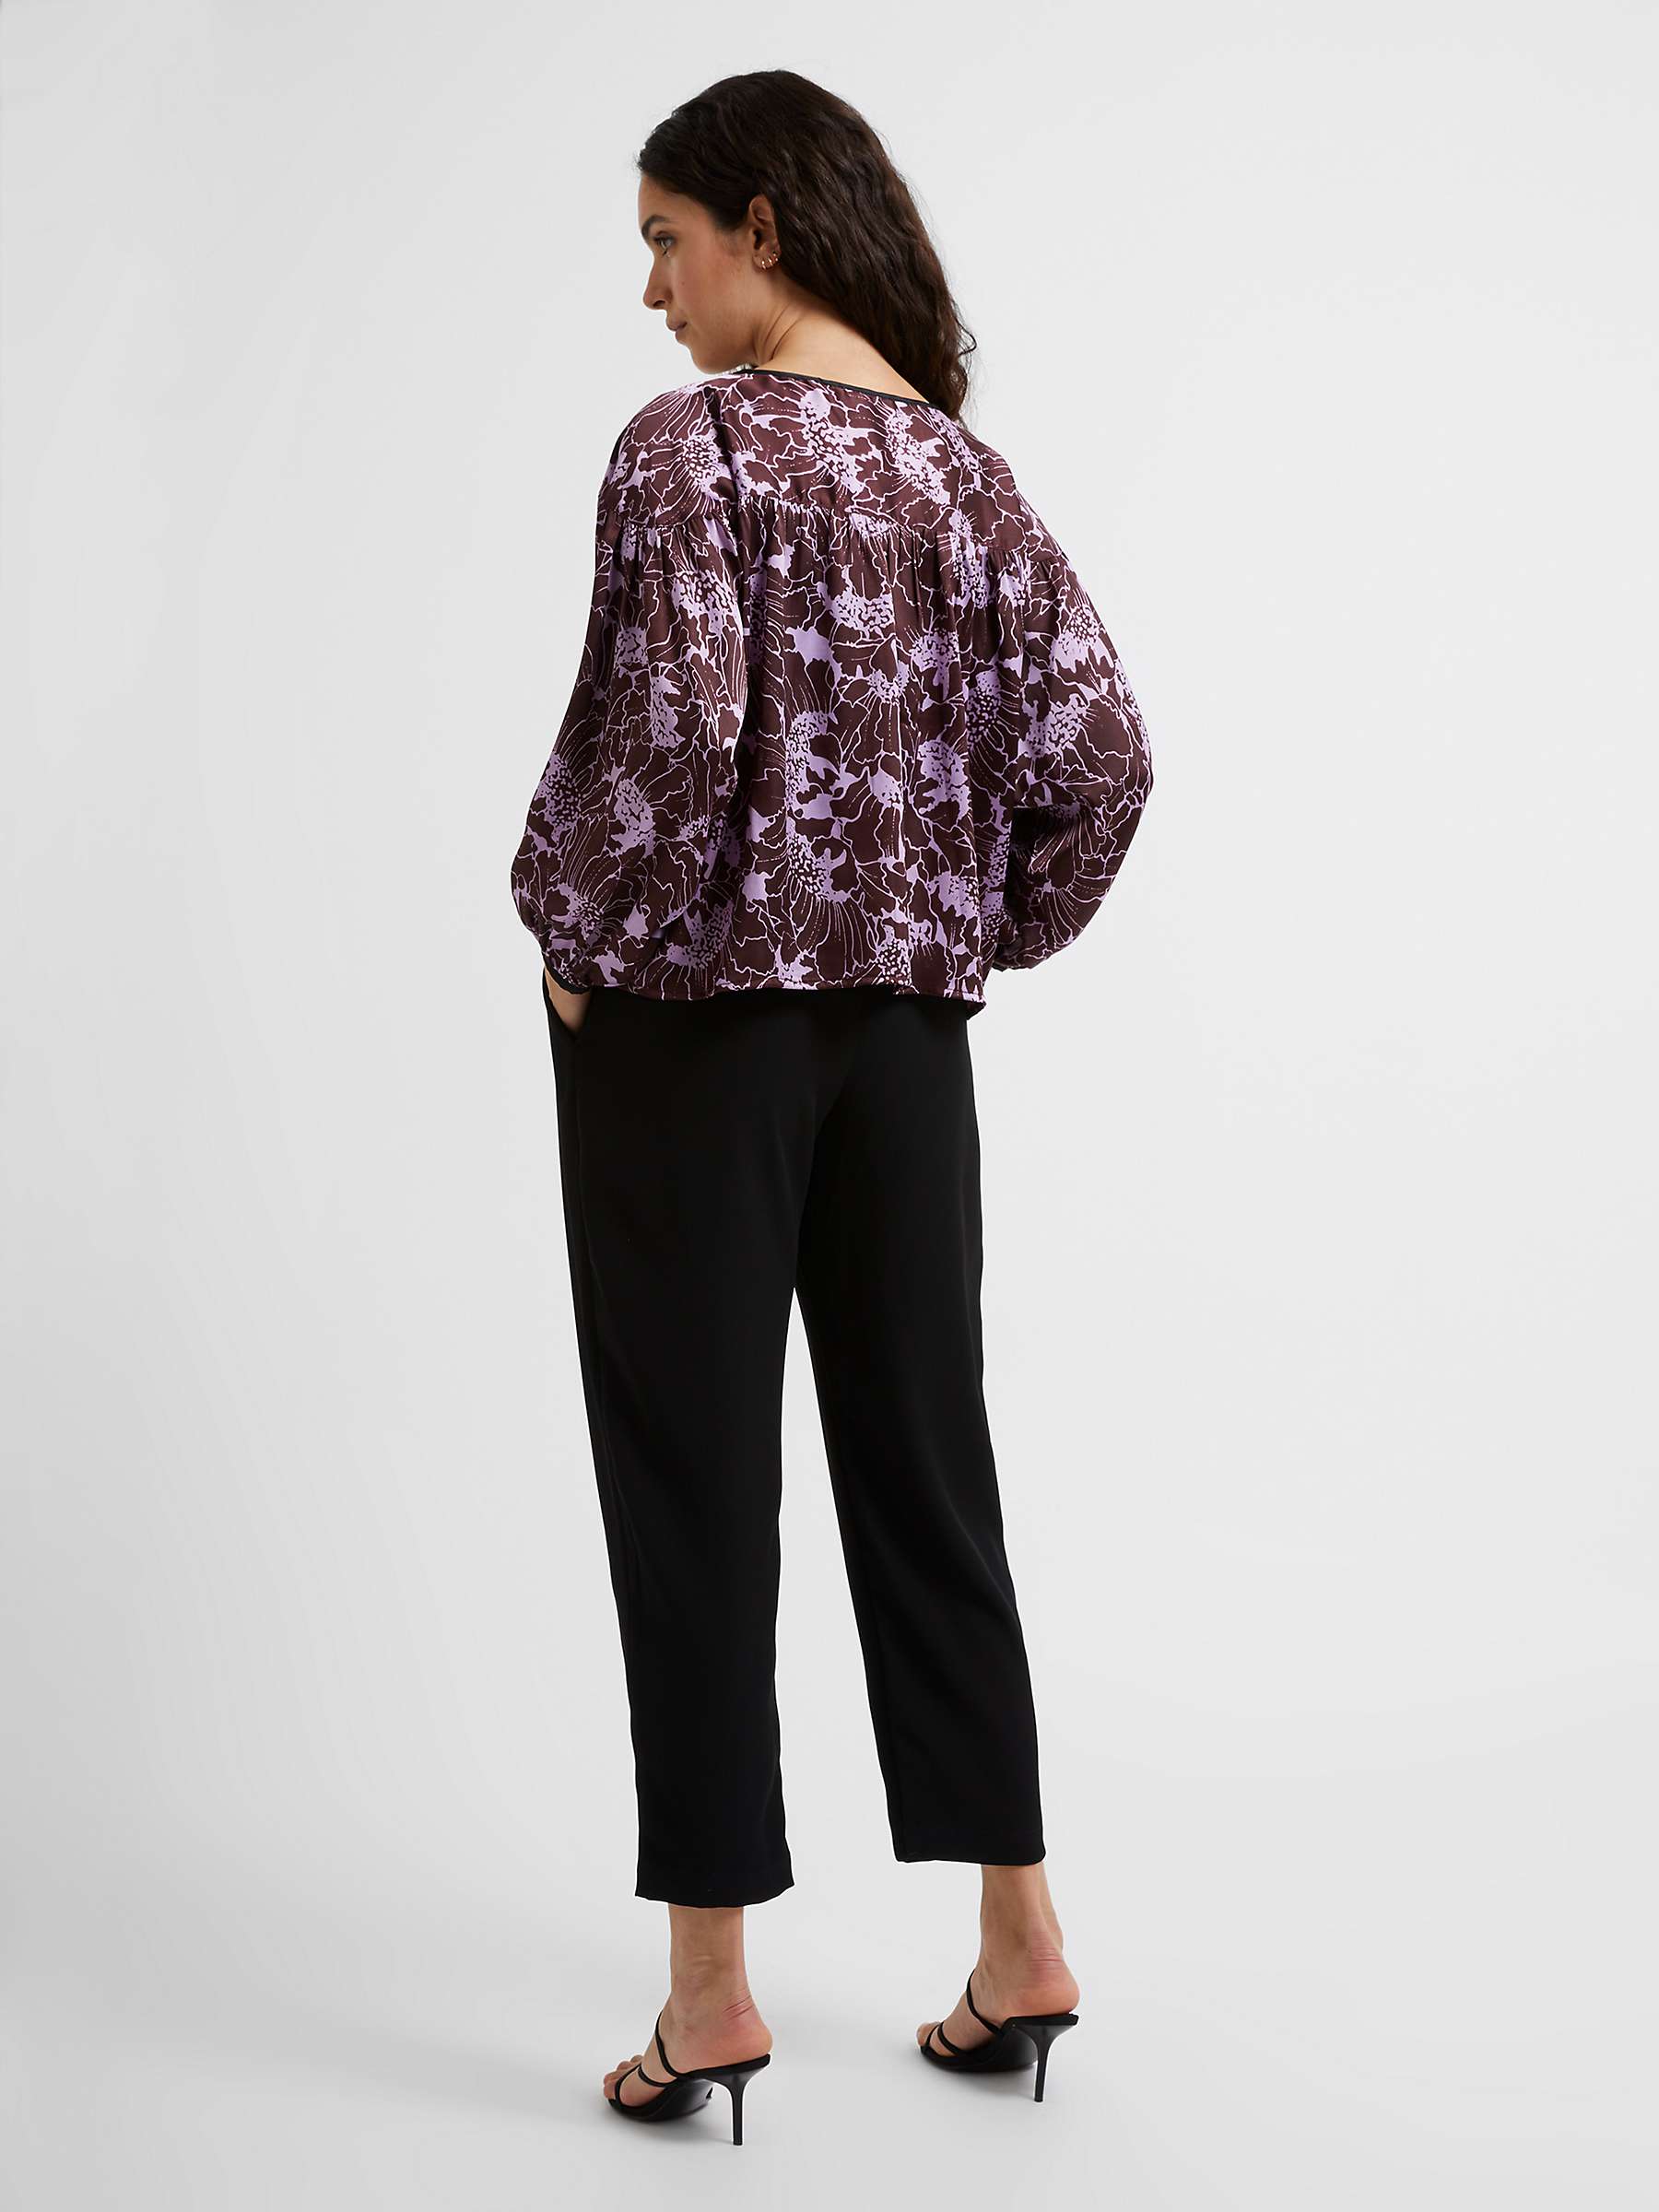 Buy Great Plains Mono Poppy Front Tie Top, Brown/Multi Online at johnlewis.com